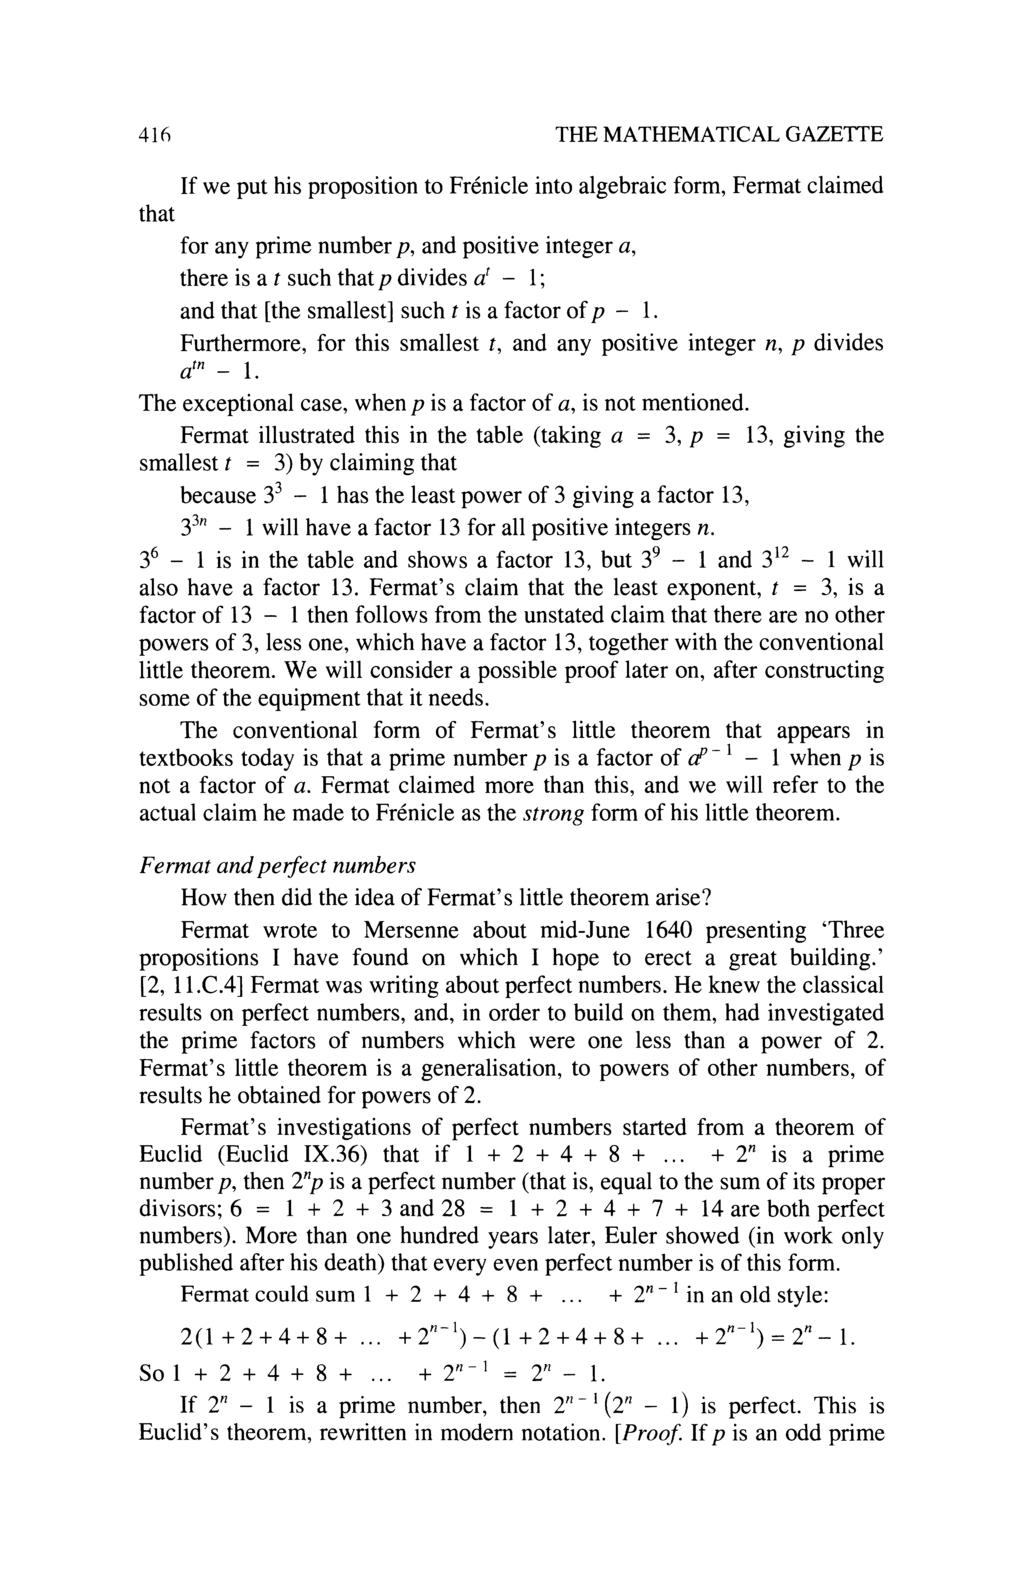 416 THE MATHEMATICAL GAZE'ITE If we put his proposition to Frenicle into algebraic form, Fermat claimed that for any prime number p, and positive integer a, there is a t such thatp divides at - 1;